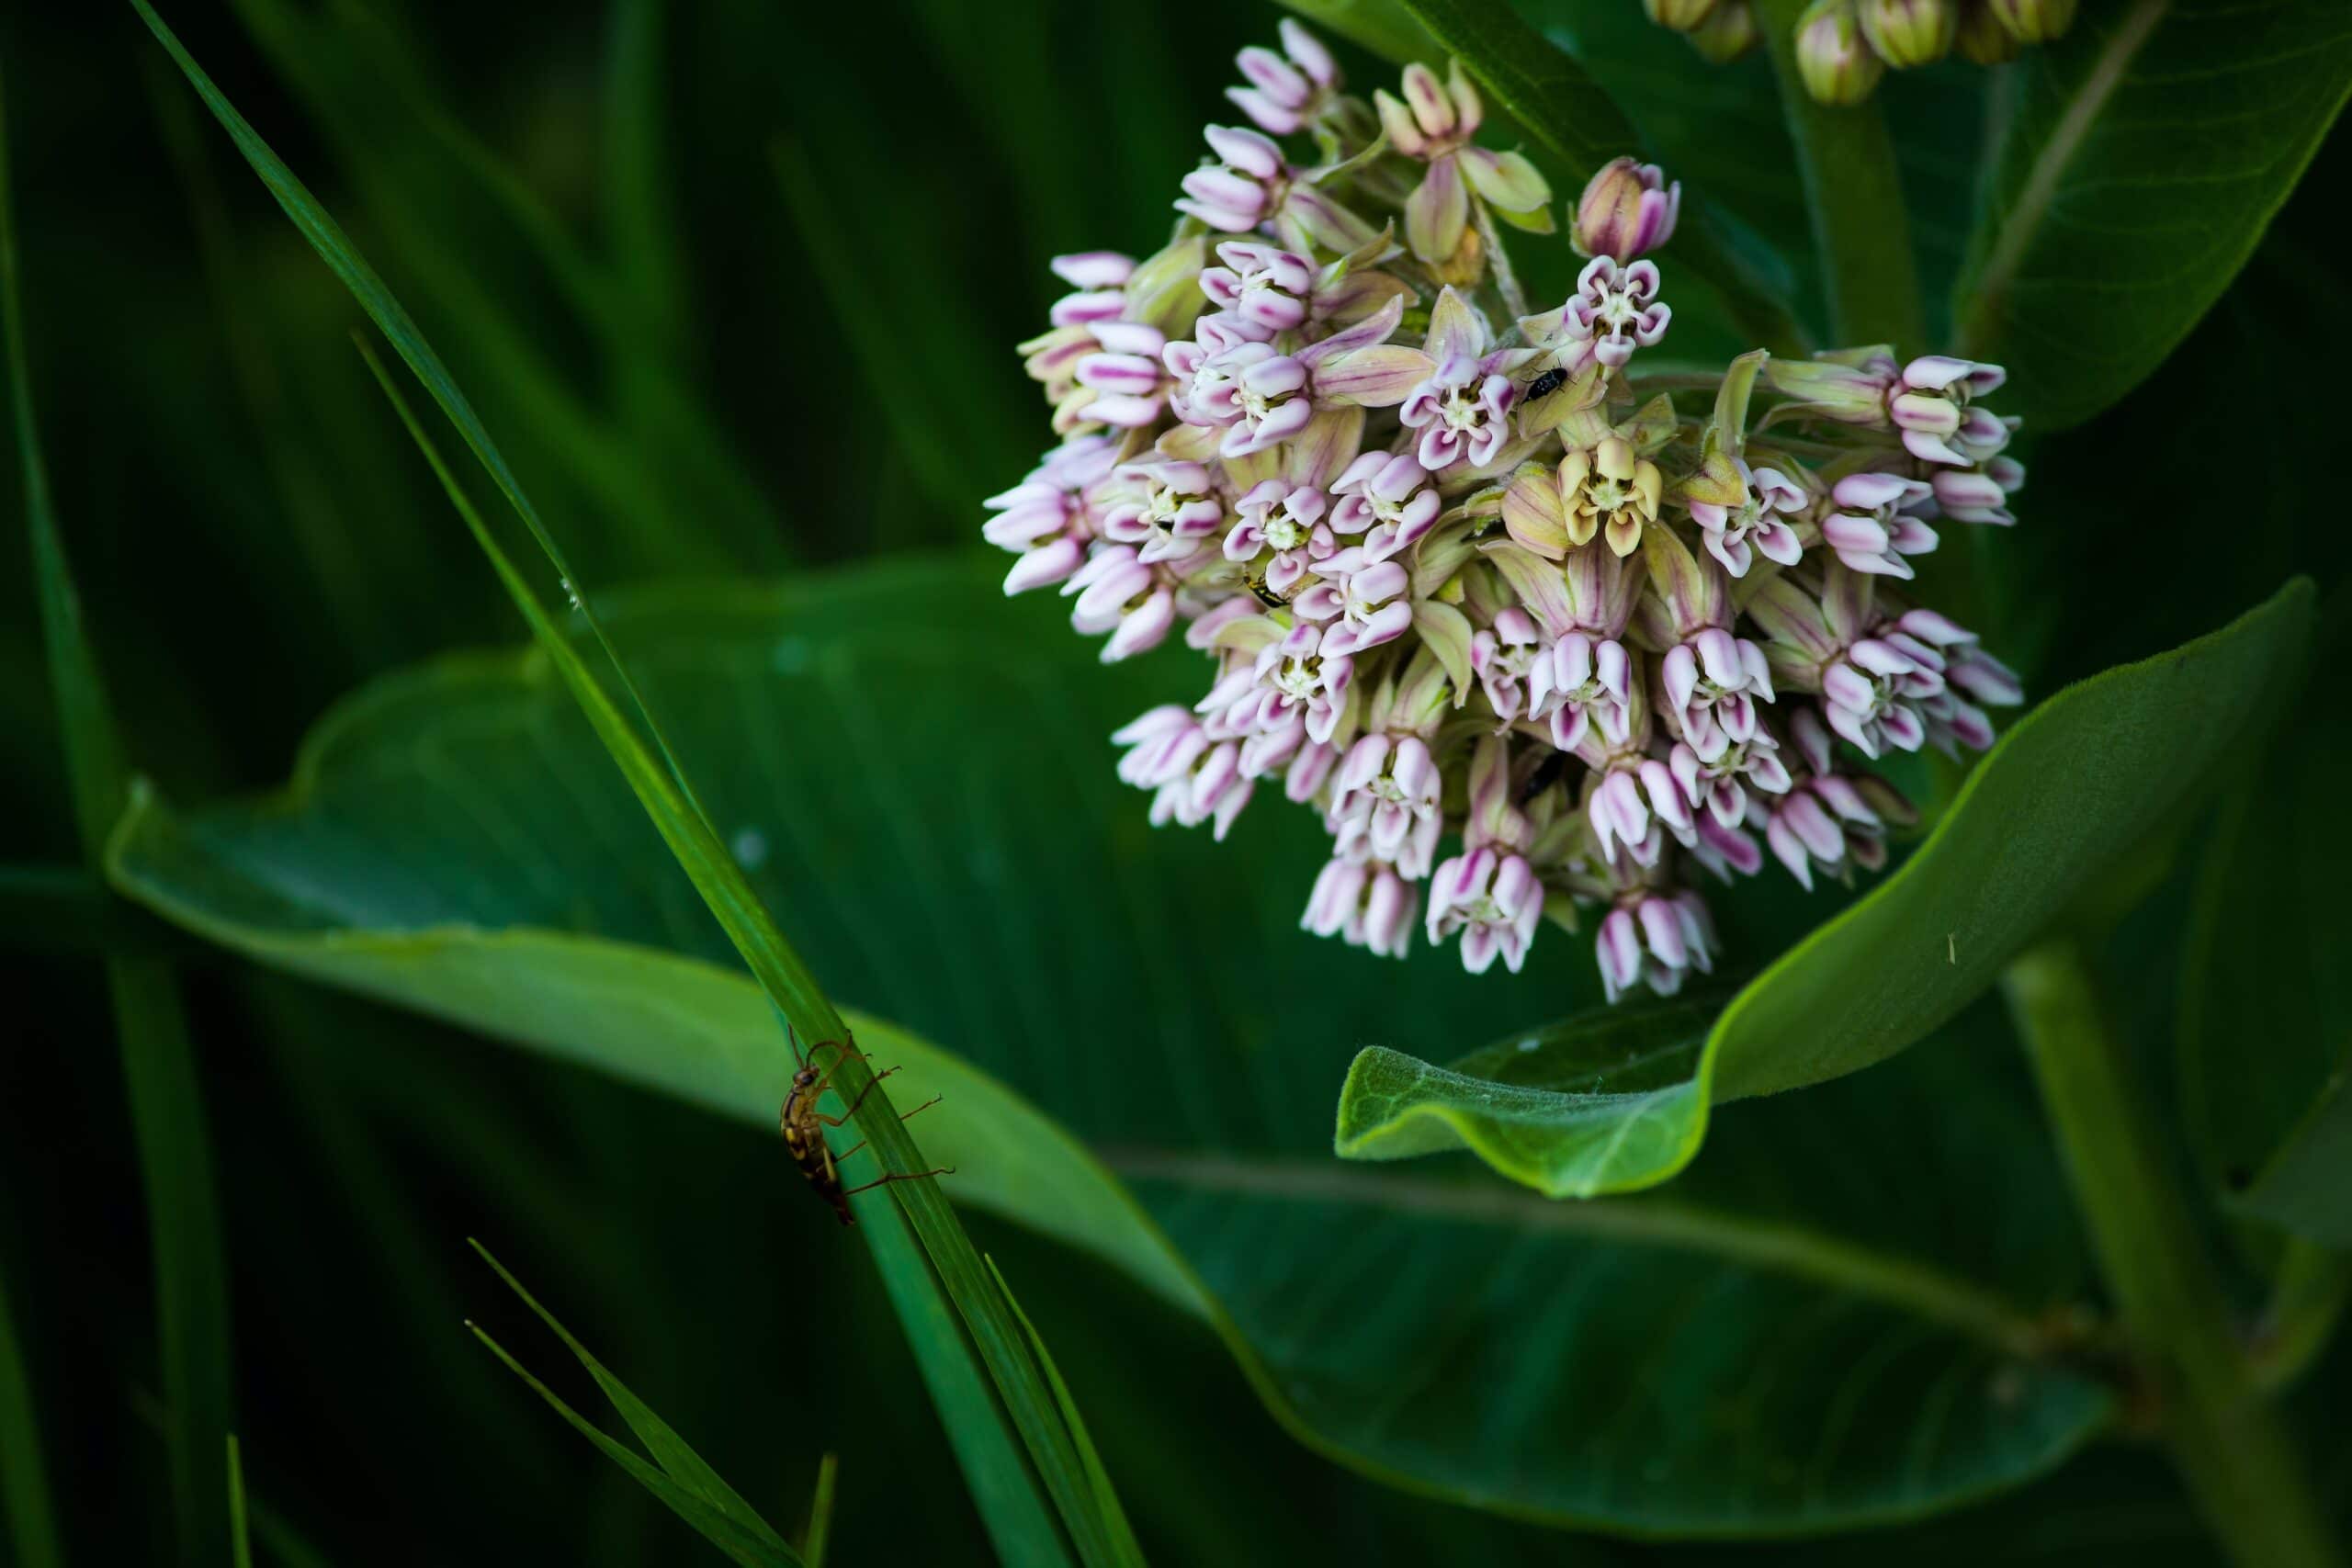 A plant called milkweed with violet flowers and deep green leaves